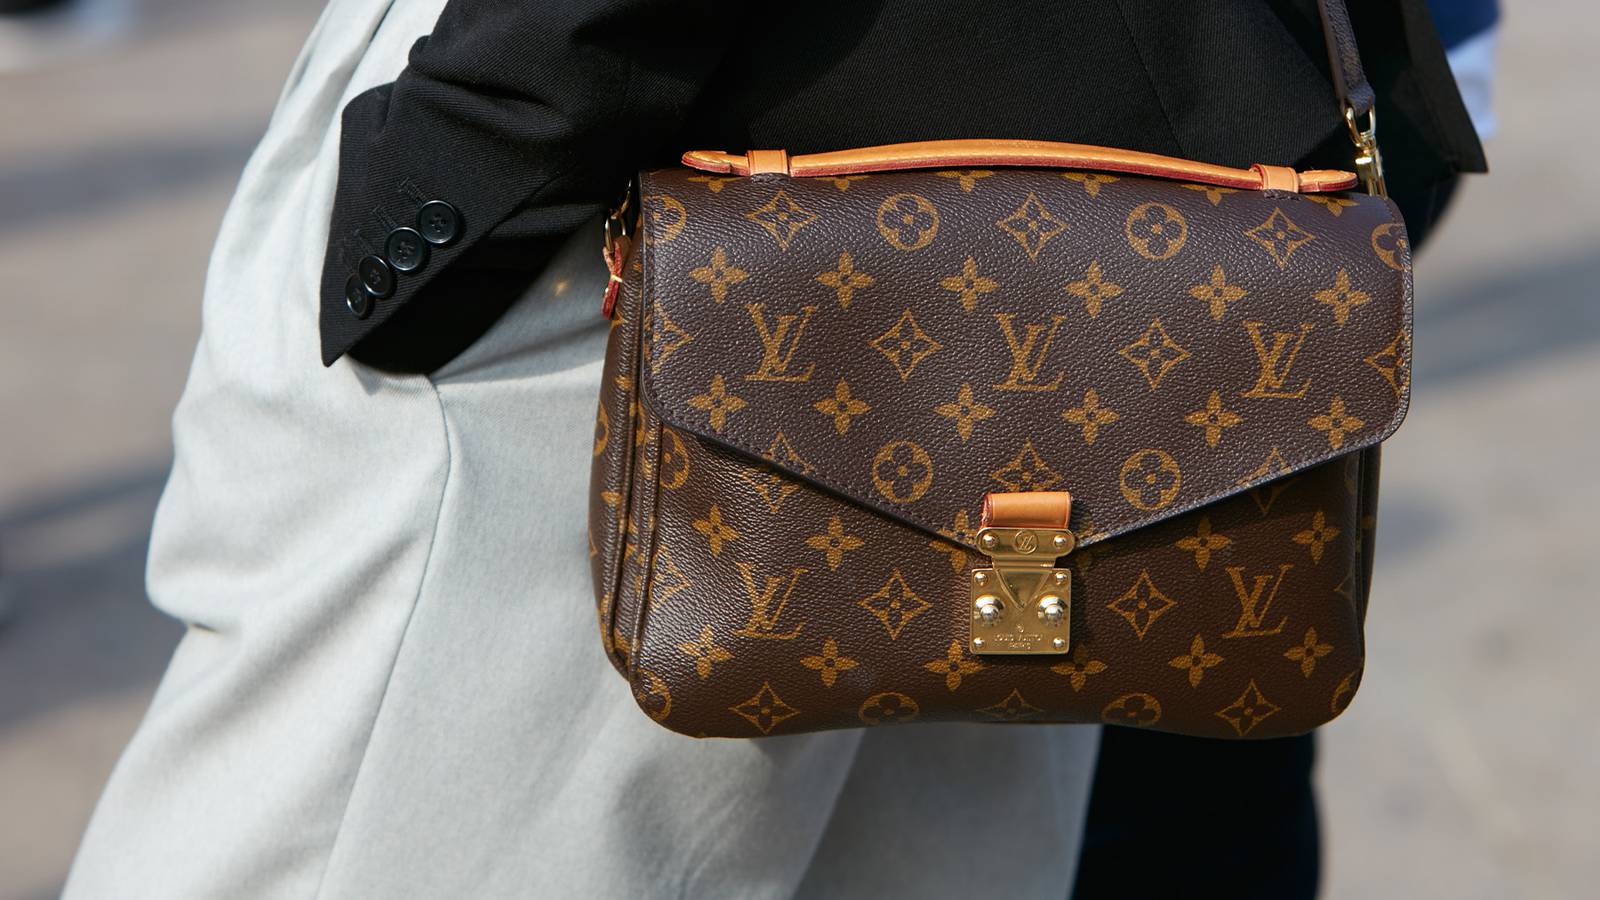 LVMH Is Now First European Company With USD 500 Billion Market Value